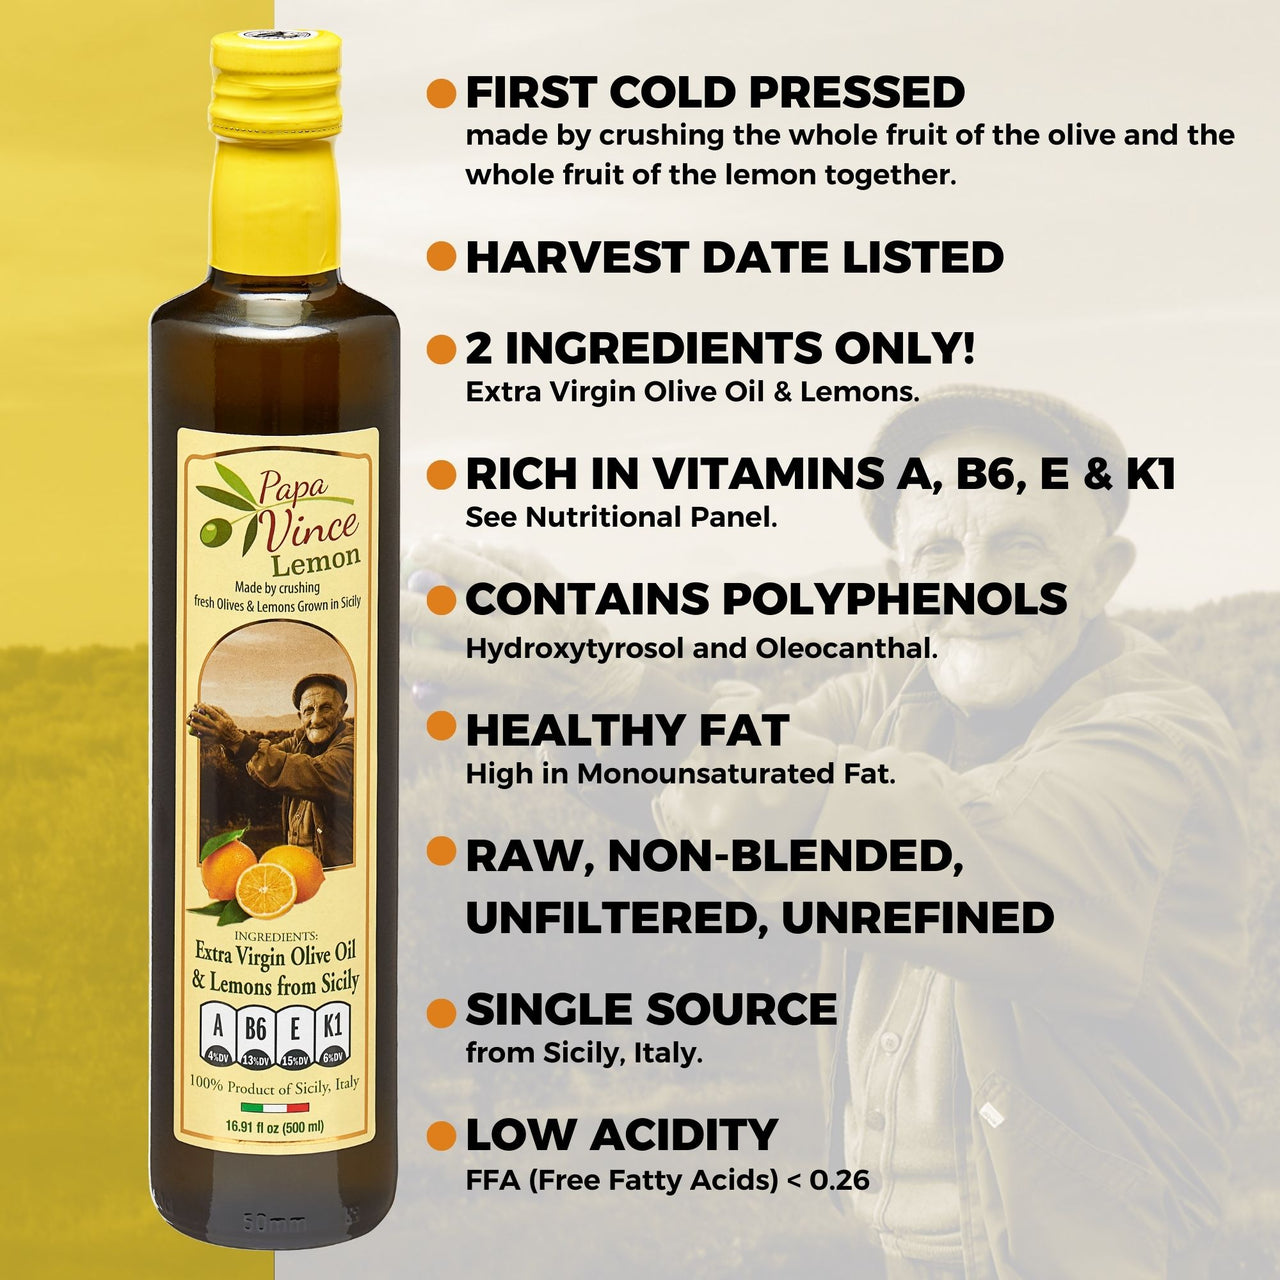 Papa Vince Lemon Olive Oil Extra Virgin First Cold Pressed Agrumato, Harvest 2019/20 Sicily, Italy, NO PESTICIDES, NO CHEMICALS, NO ARTIFICIAL FLAVORS, Unblended Unfiltered, Peppery Finish, 16.9 fl oz - Papa Vince